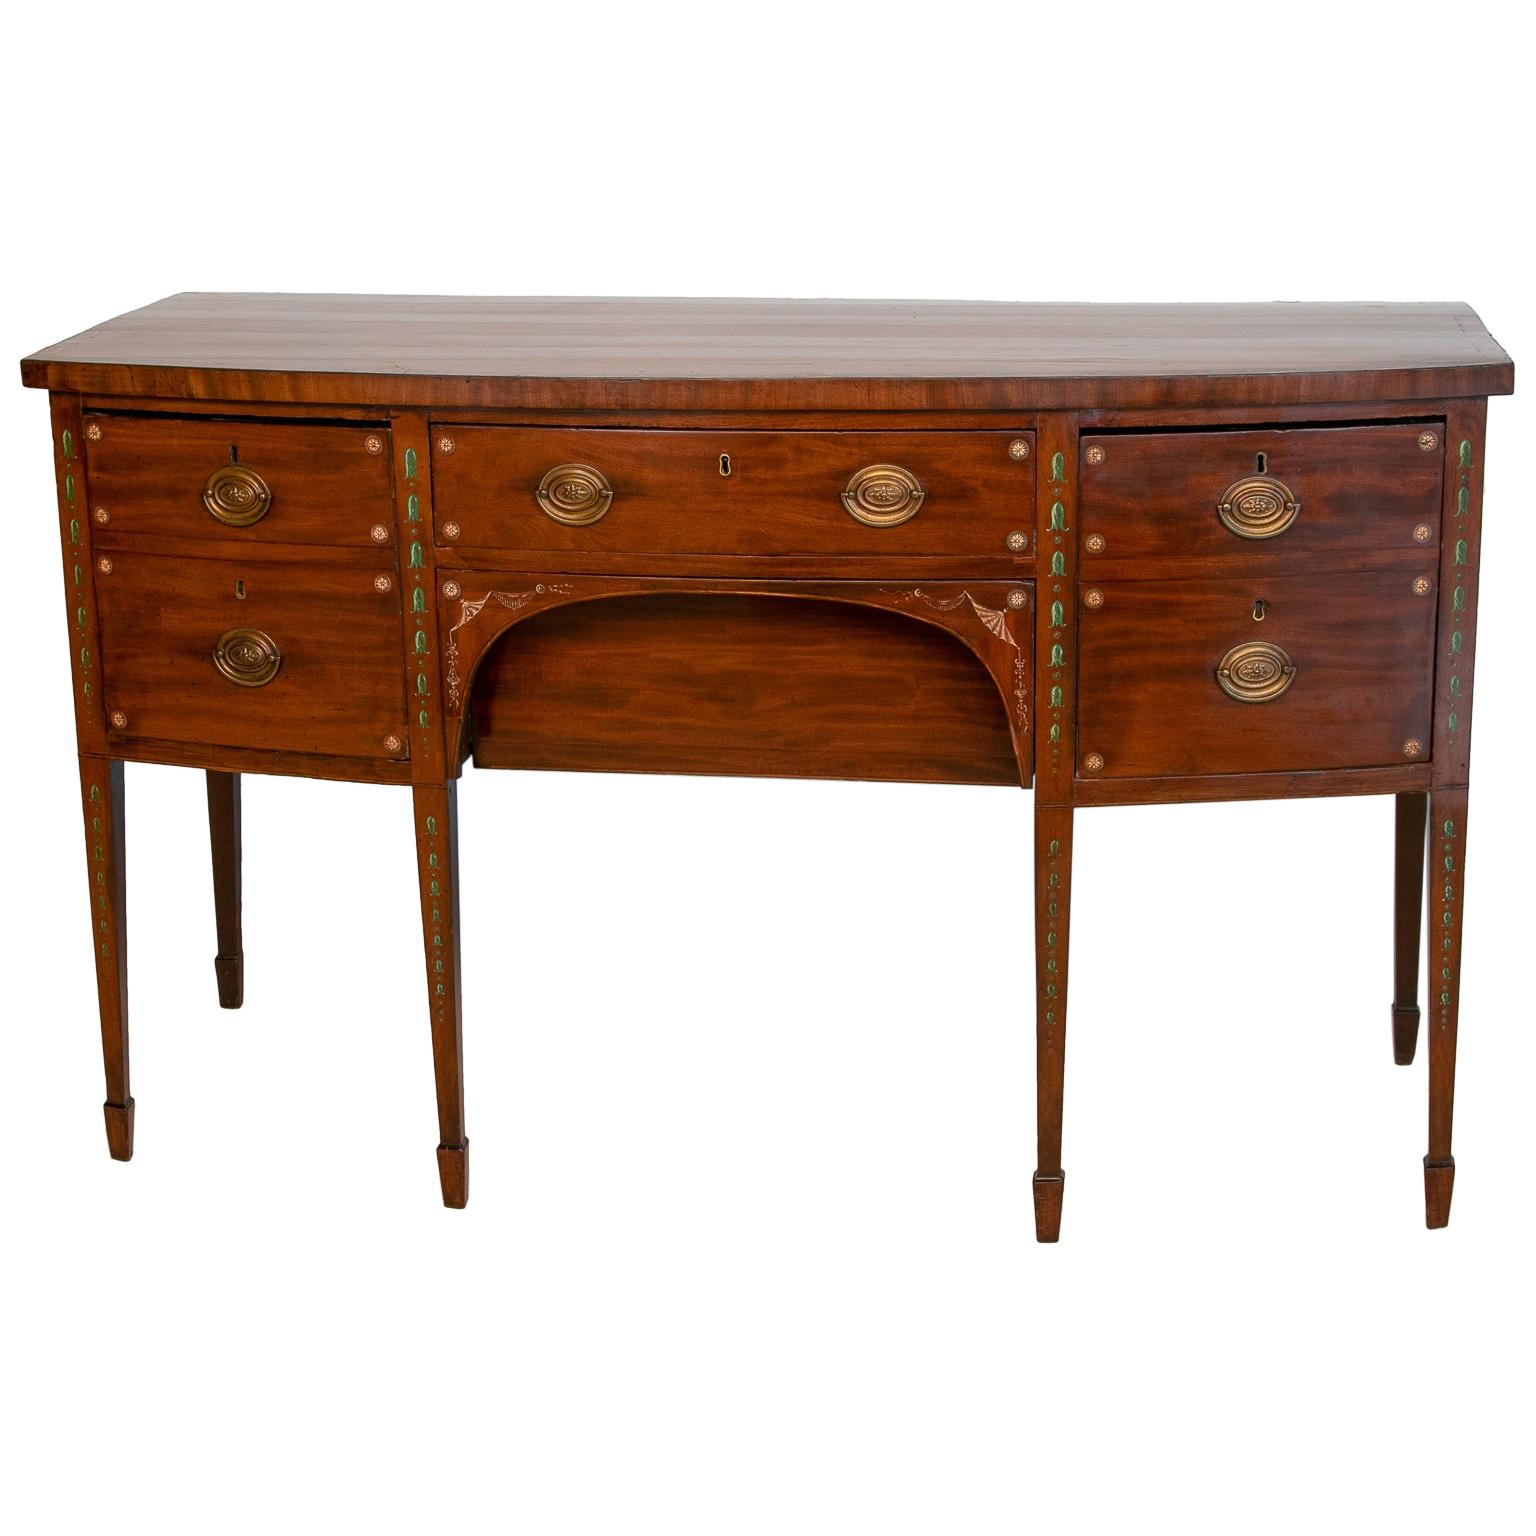 19th C. English Bow-Front Sideboard For Sale